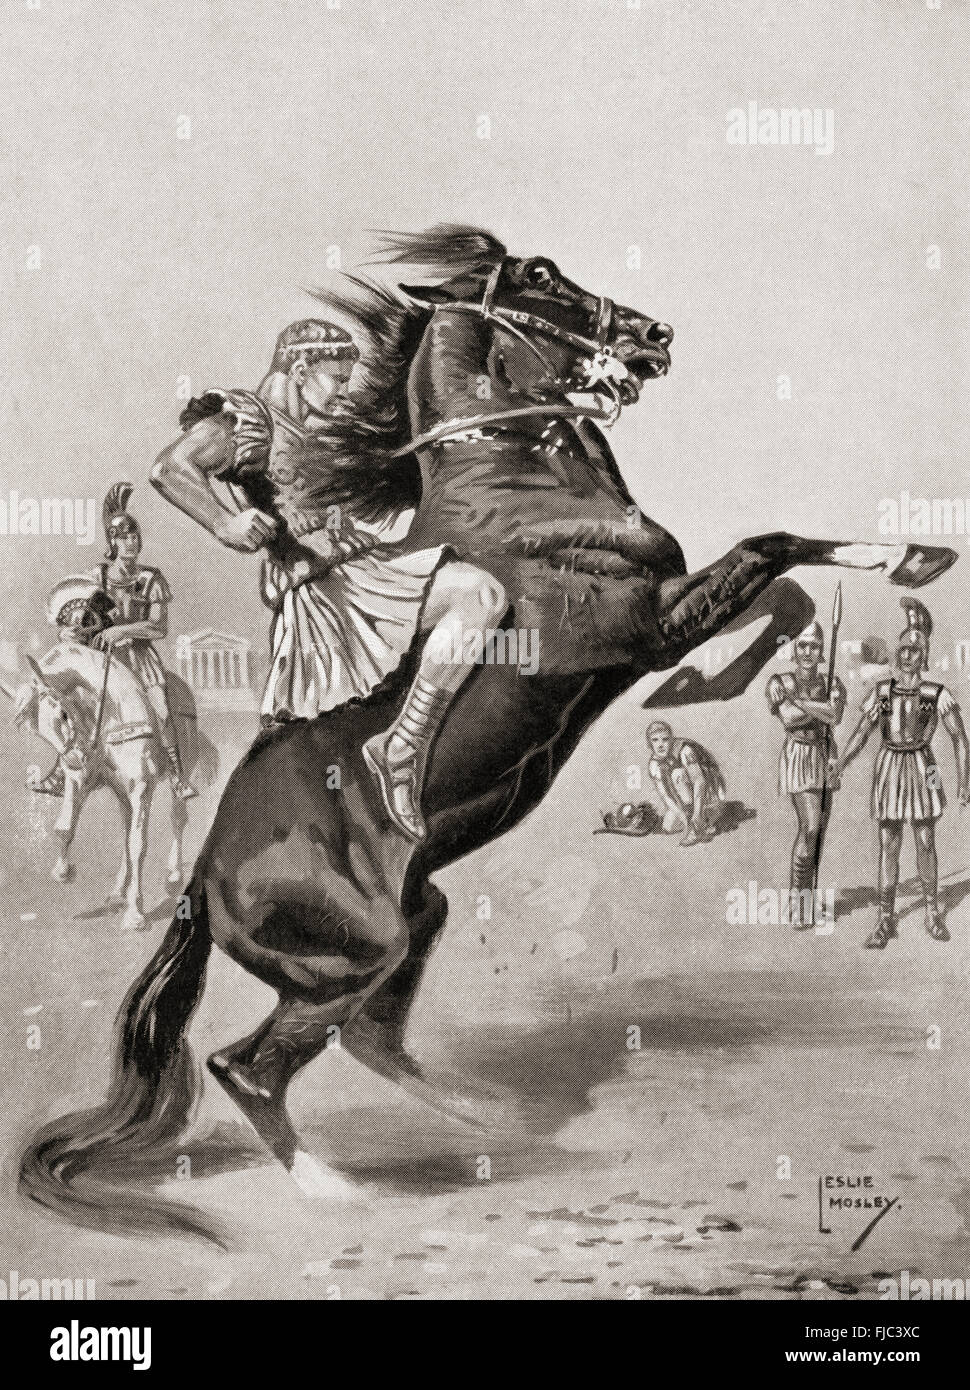 The taming of Bucephalus by Alexander the Great, 4th century BC.  Alexander III of Macedon, 356 BC – 323 BC, commonly known as Alexander the Great. Stock Photo